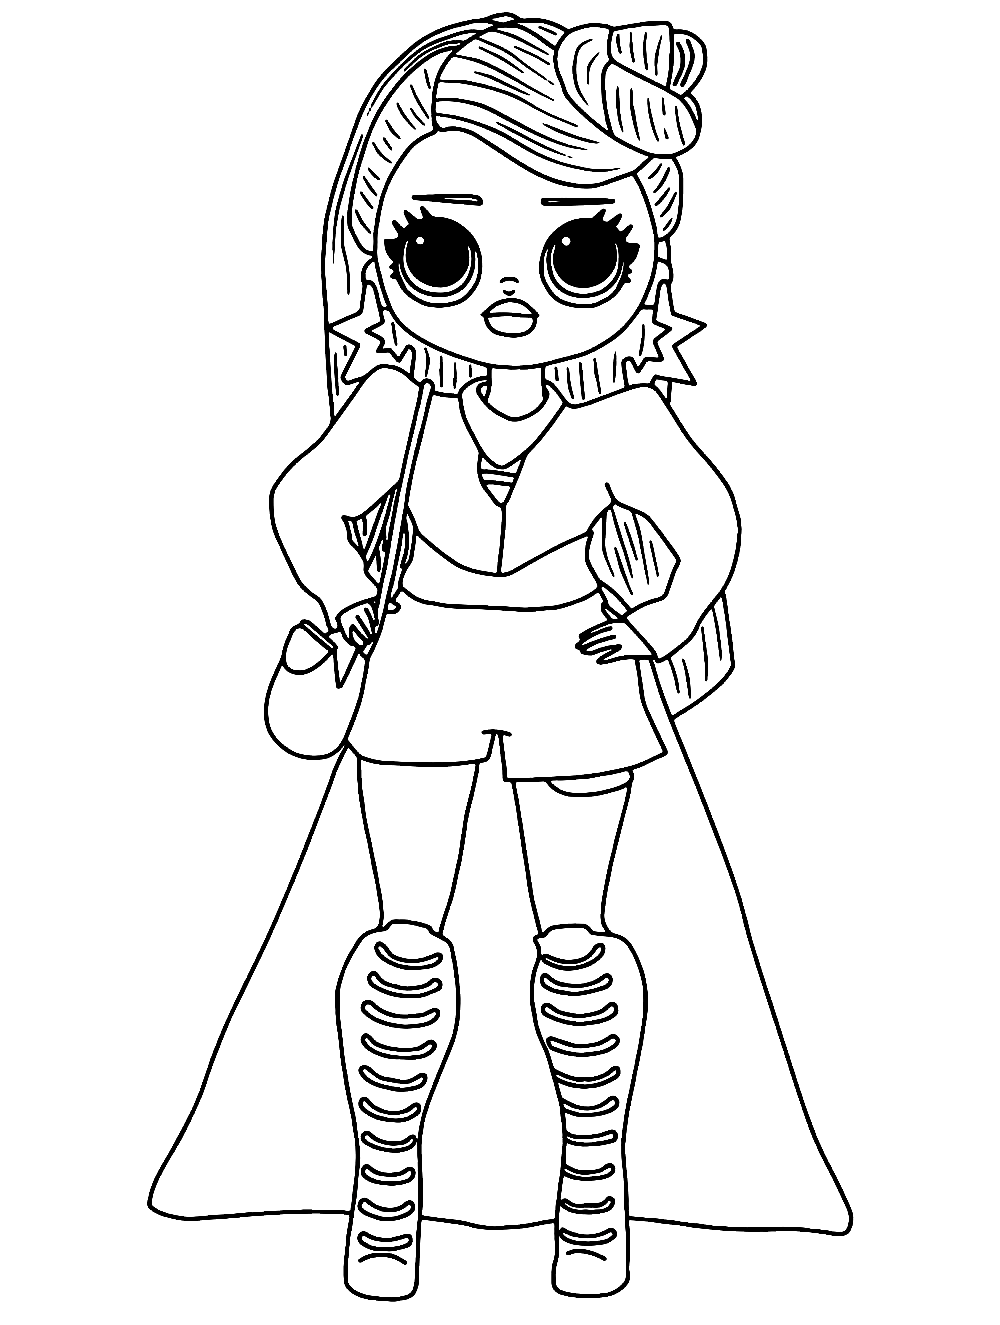 Miss Independent LOL OMG Coloring Pages